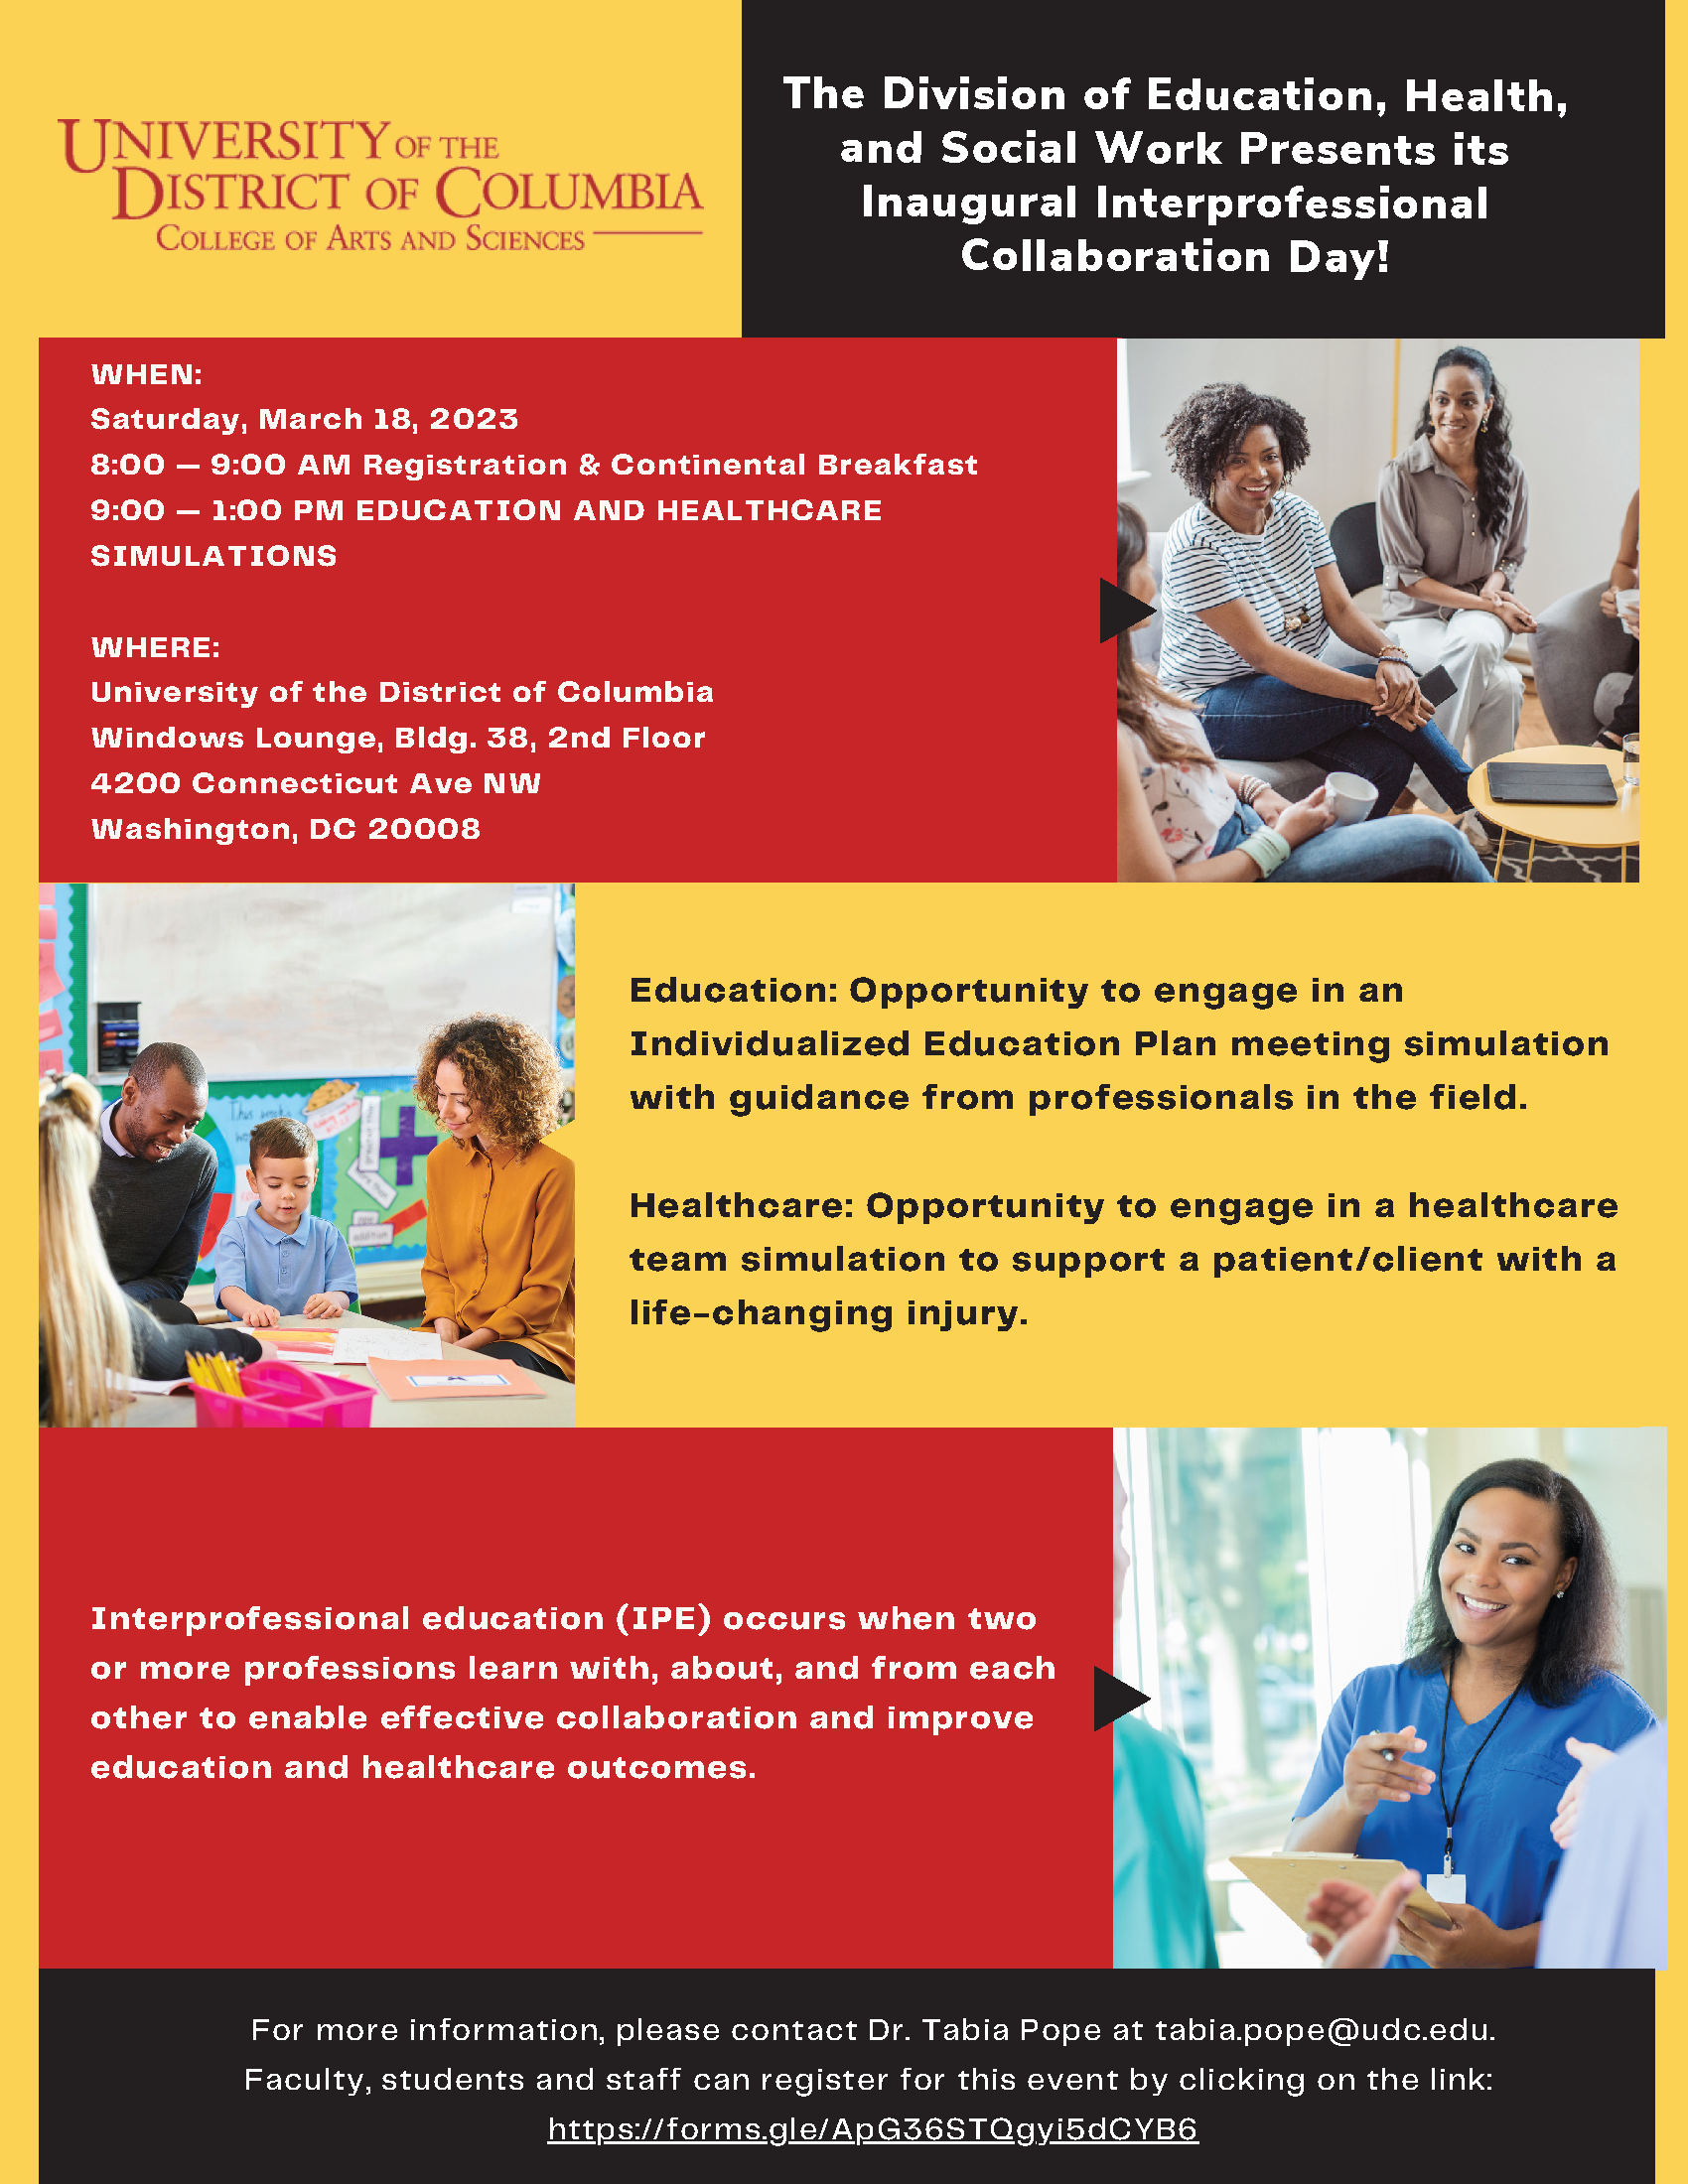 he Division of Education, Health, and Social Work of the College of Arts & Sciences presents its Inaugural Interprofessional Collaboration Day on Saturday, March 18th, from 8:00 am – 1:00 pm! We cordially invite all faculty, students and staff to learn with, about, and from other professionals to enhance effective collaboration and improve education or healthcare outcomes.